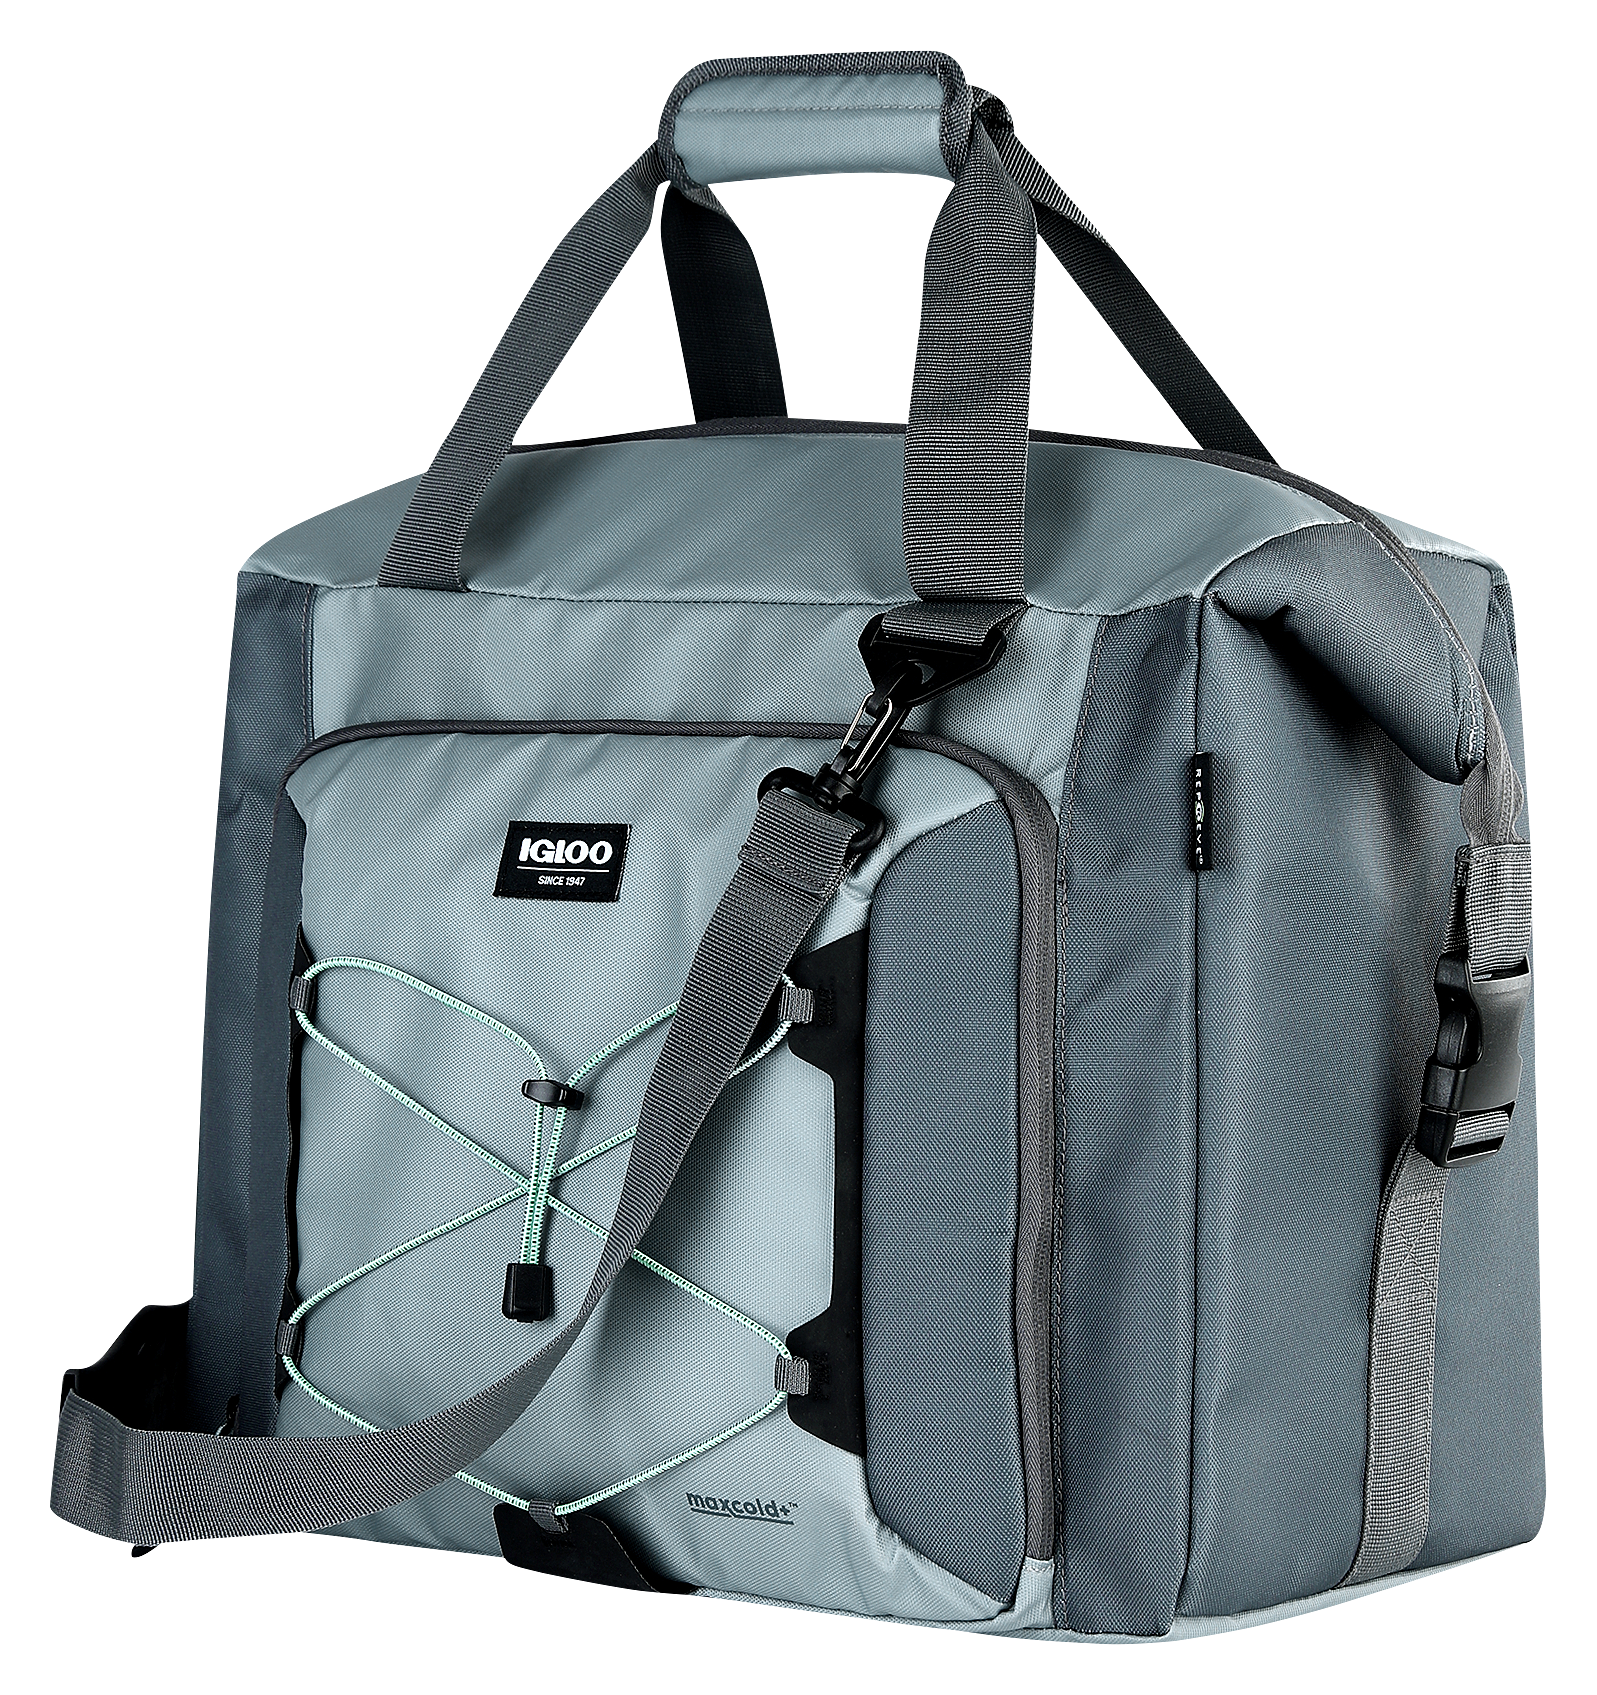  Igloo Gray 28 Can Voyager Softsided Tote : Clothing